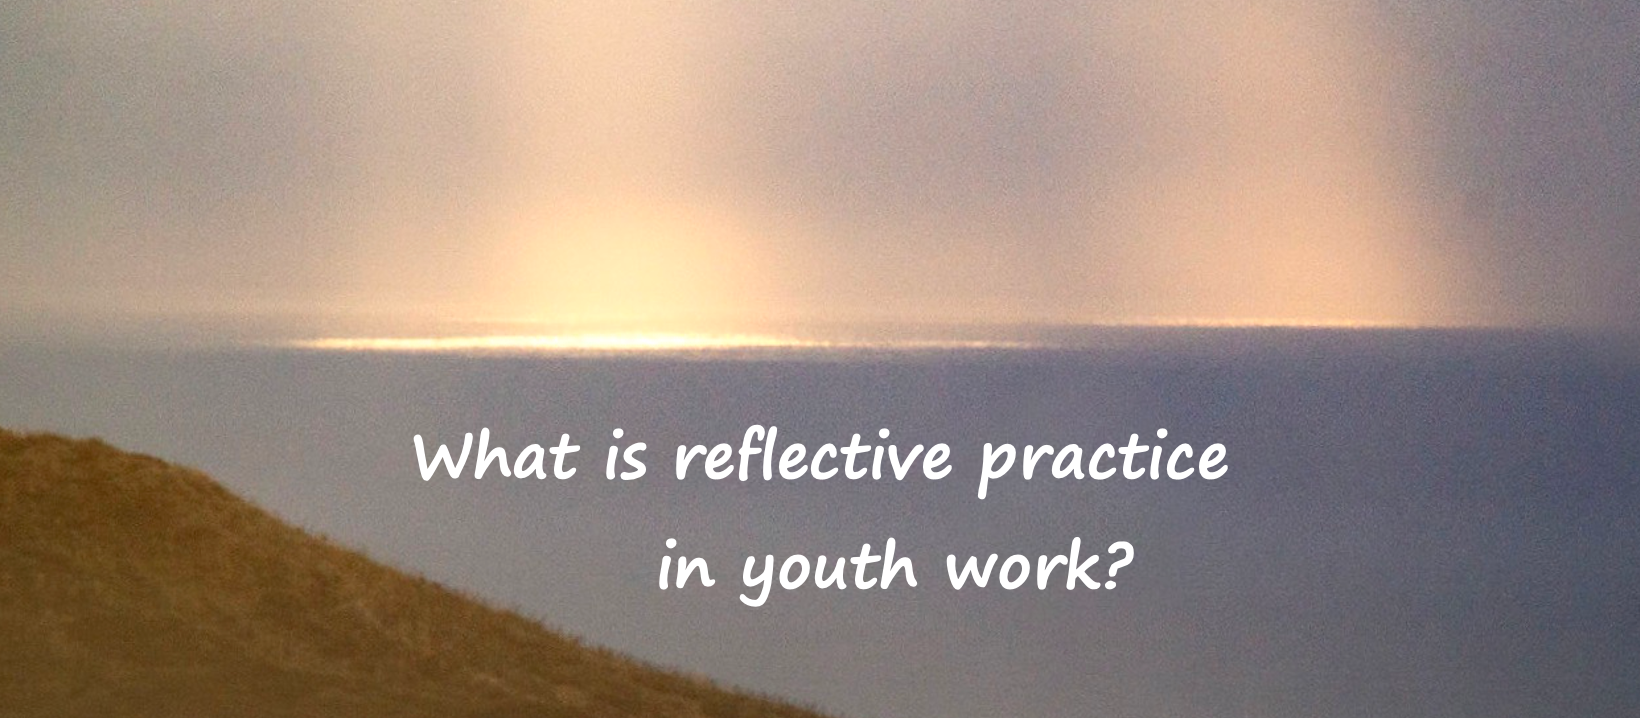 What is reflective practice in youth work? Photo shows: Light on ocean shining through clouds. Photo by Ian Thomson: Ian@NZFlickr